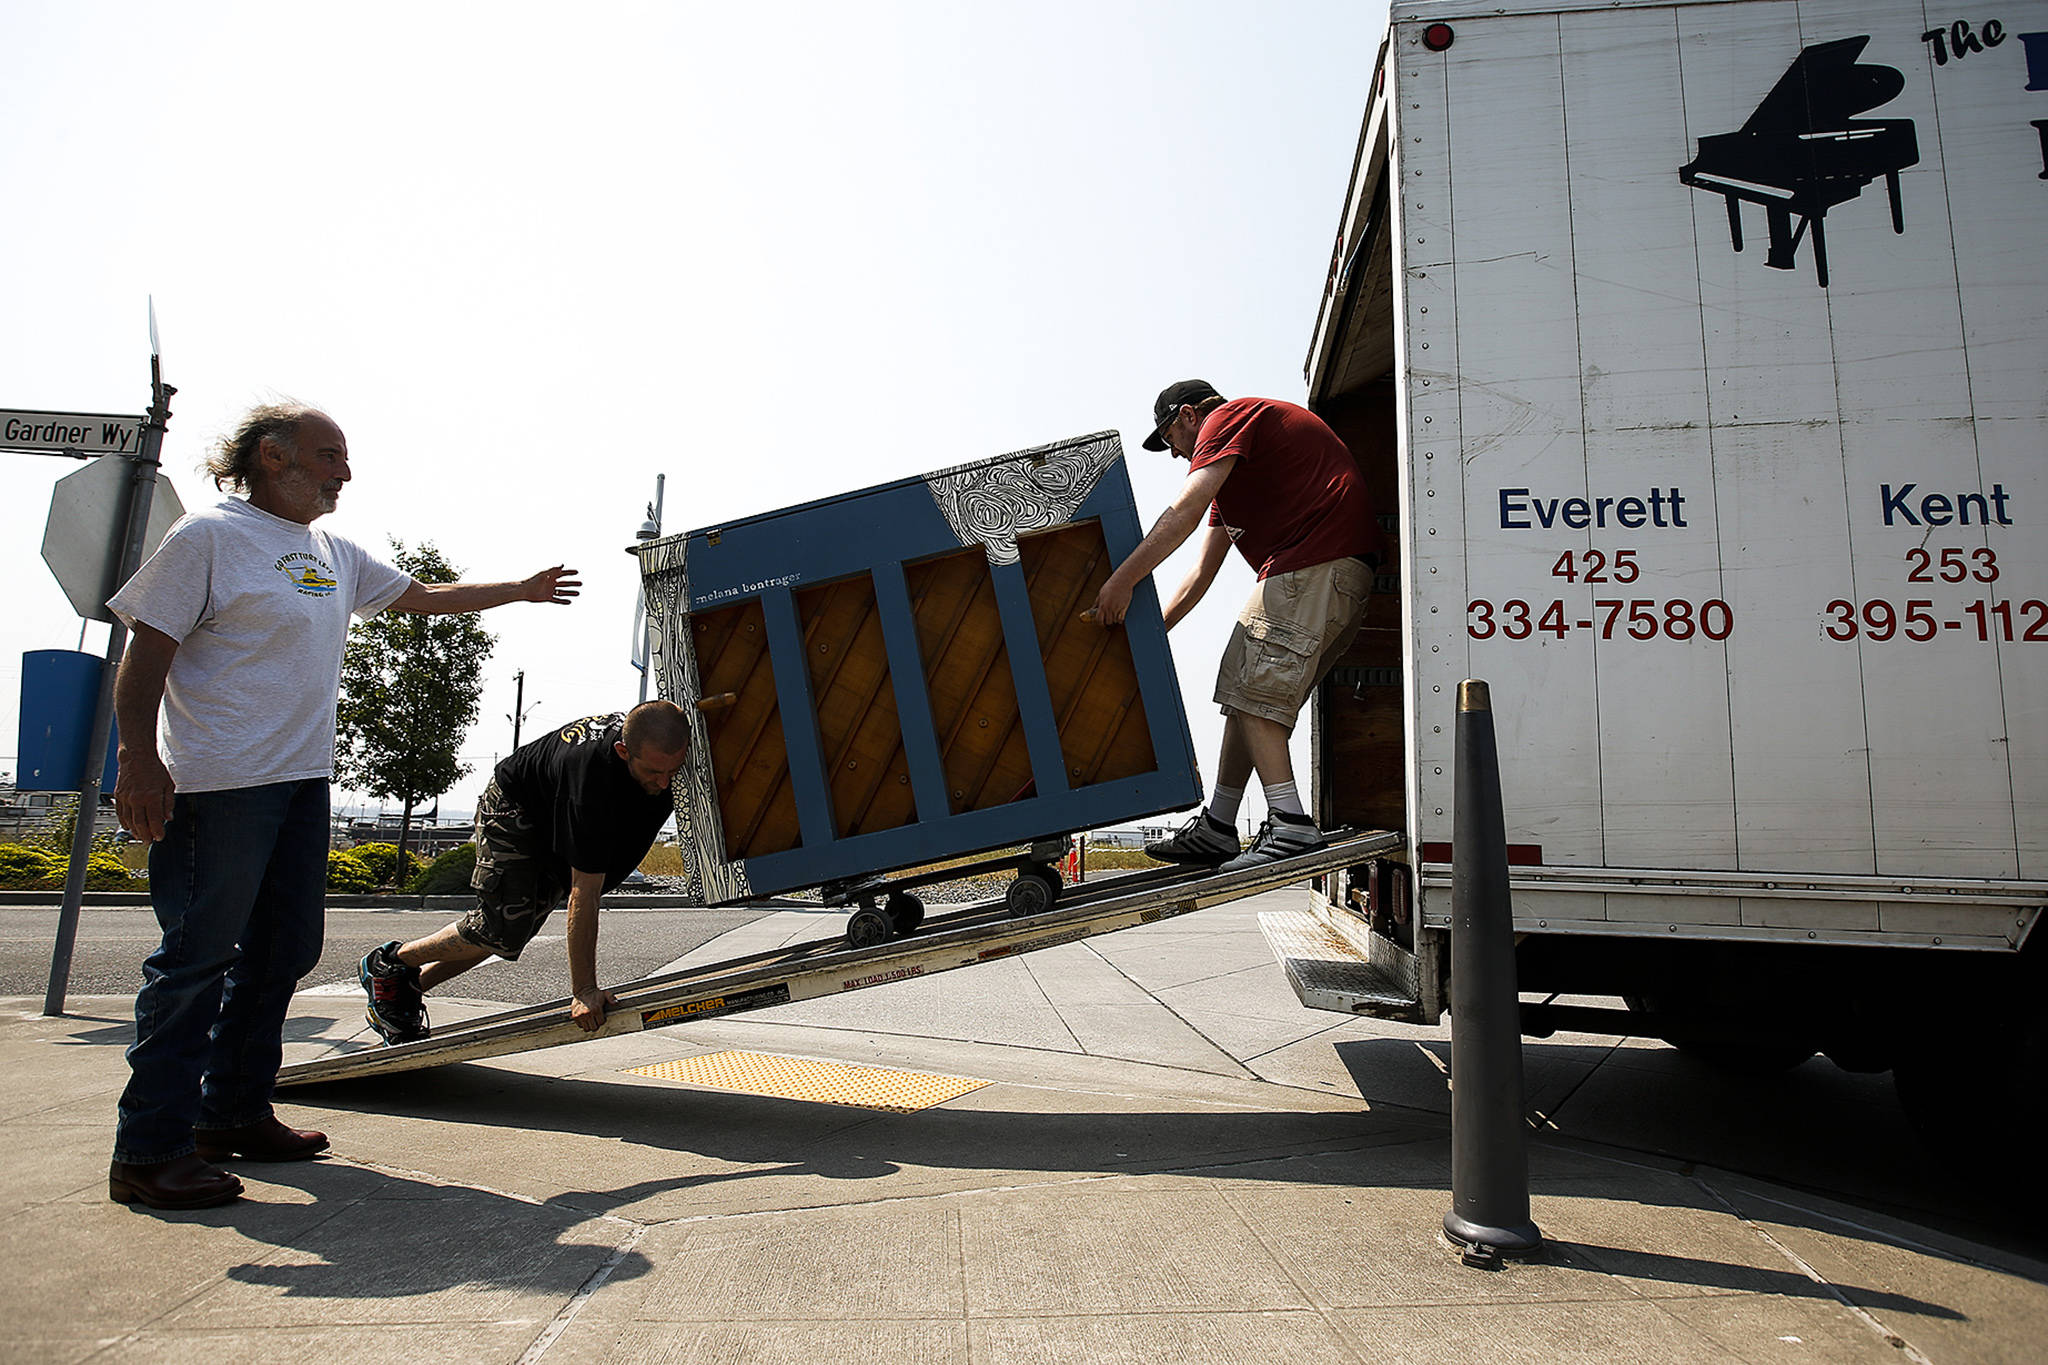 Mike Alkire (left) directs Dan Demascio (center left) and Robert Alkire as they roll out a piano to be placed in front of Scuttlebutt Brewery on the Everett waterfront on Aug. 2. (Ian Terry / The Herald)